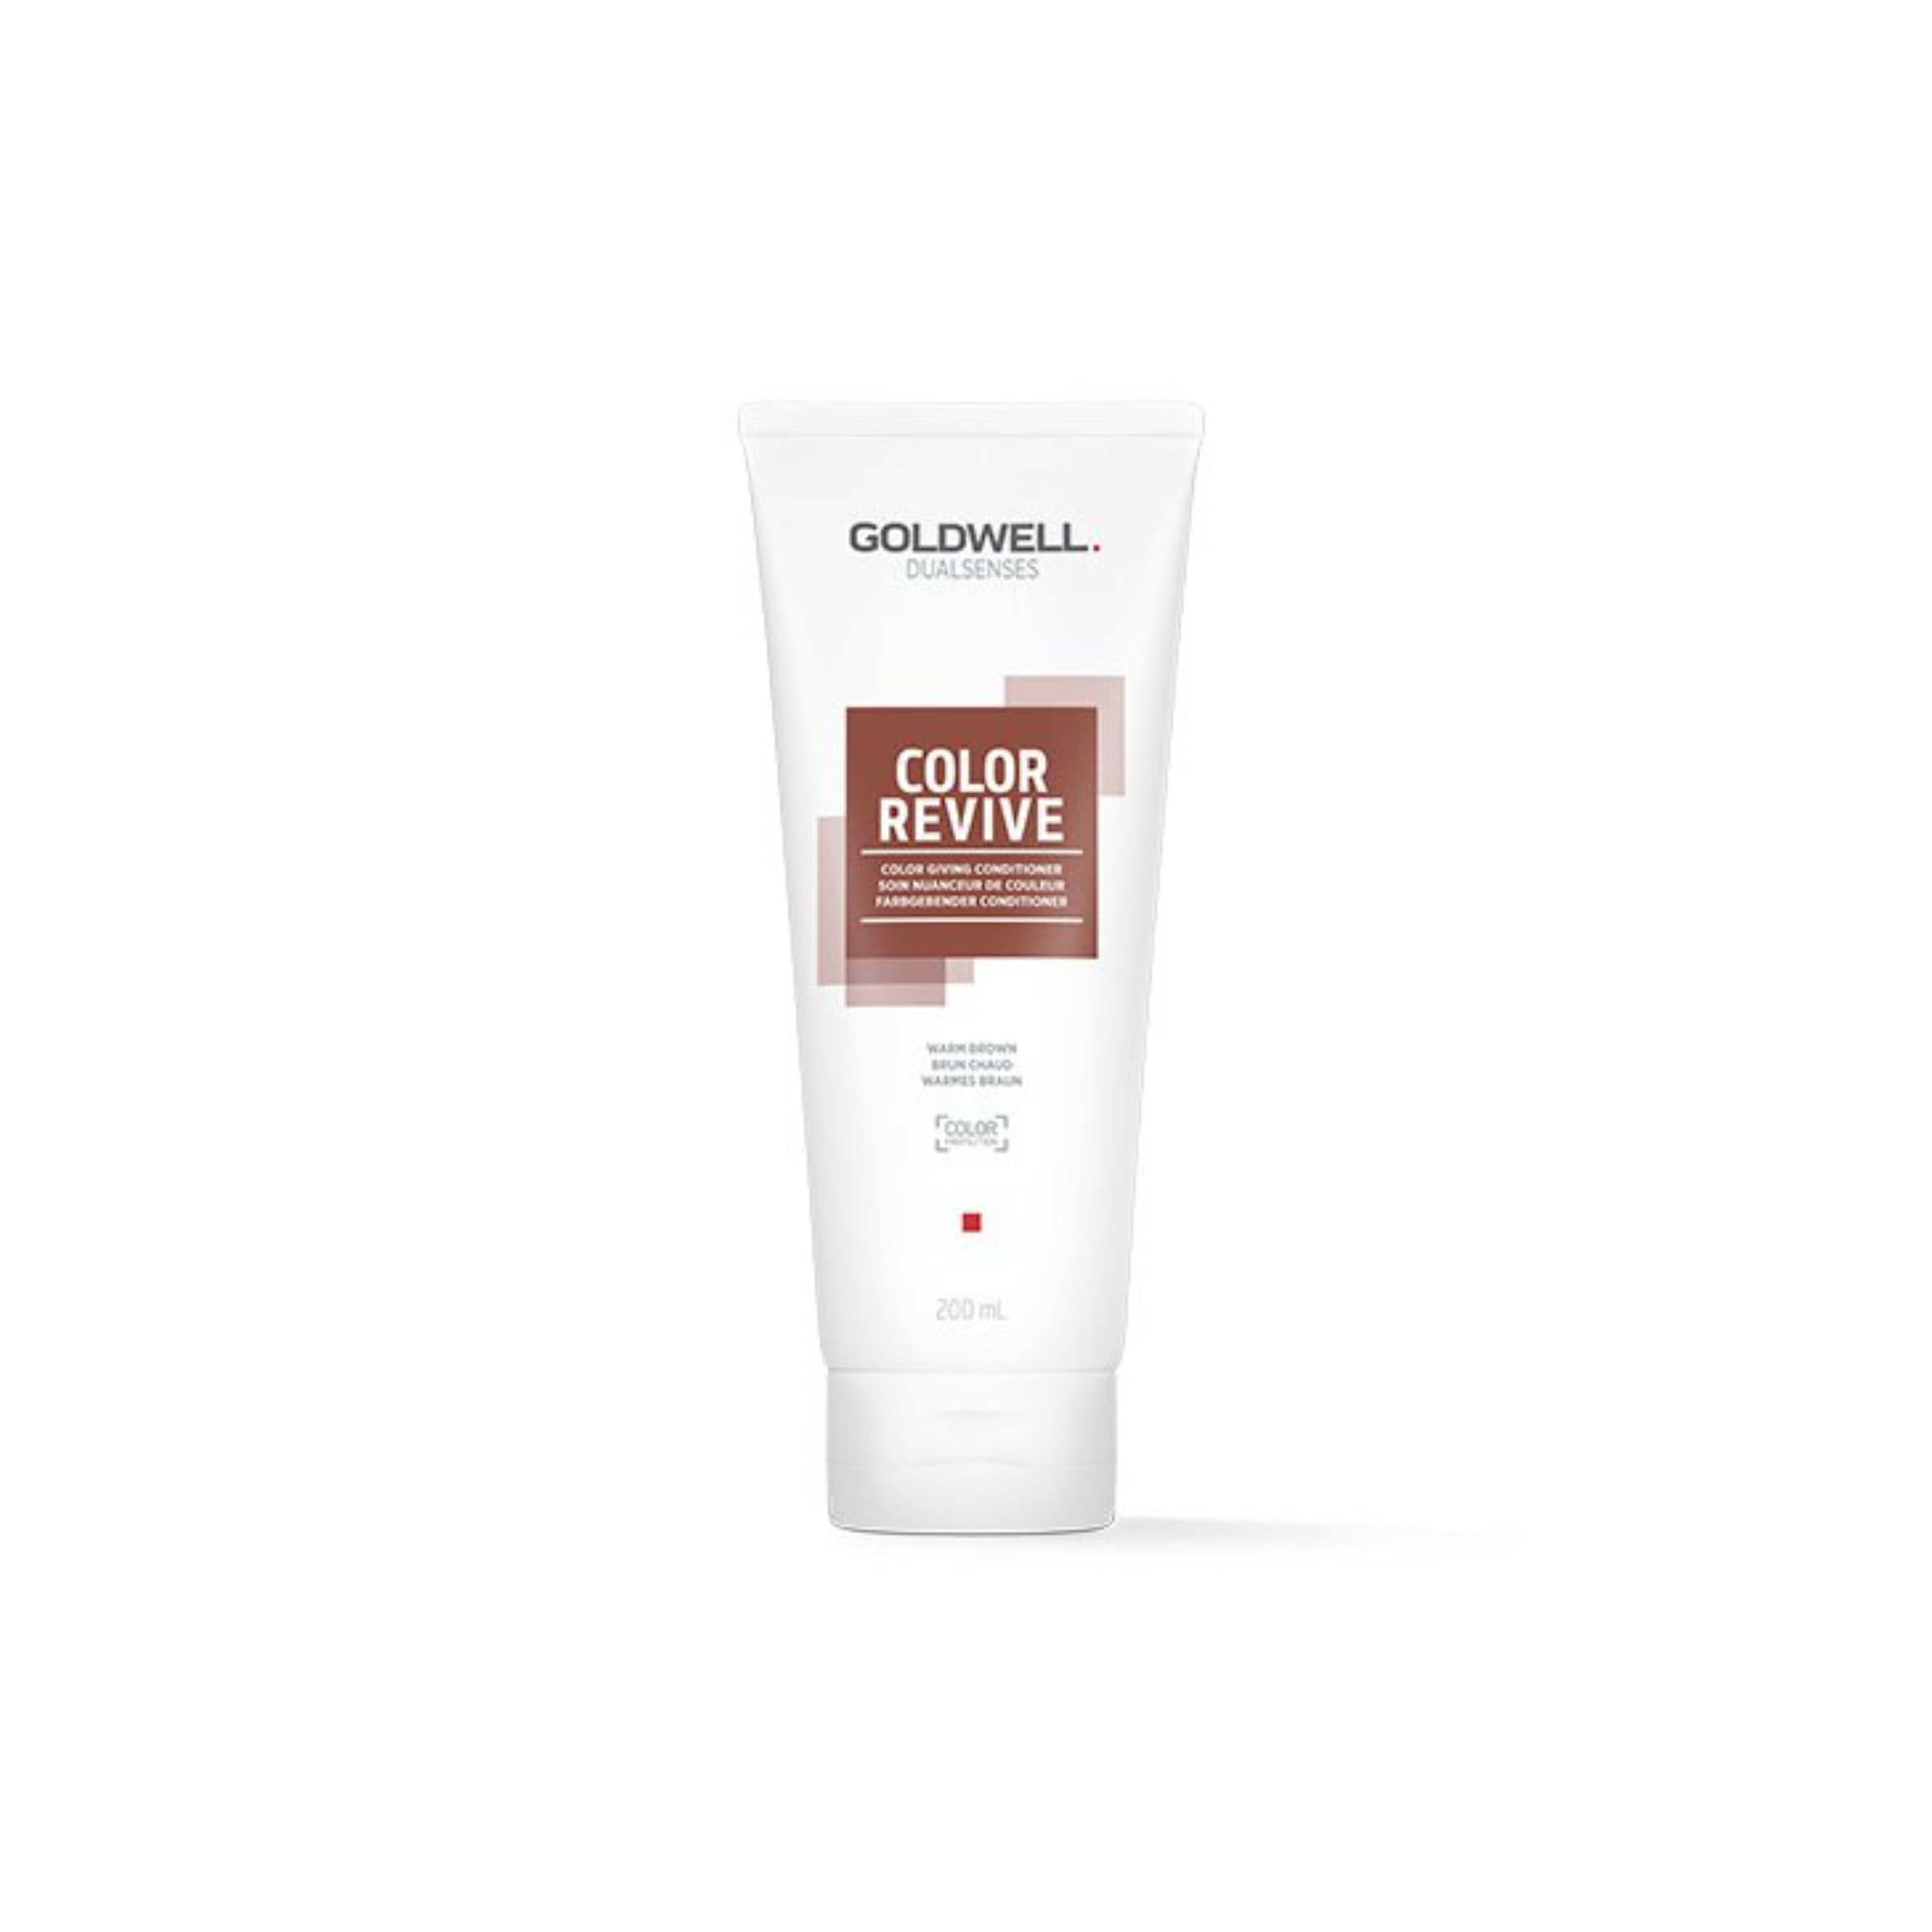 Goldwell Color Revive Color Giving Conditioner - Warm Brown